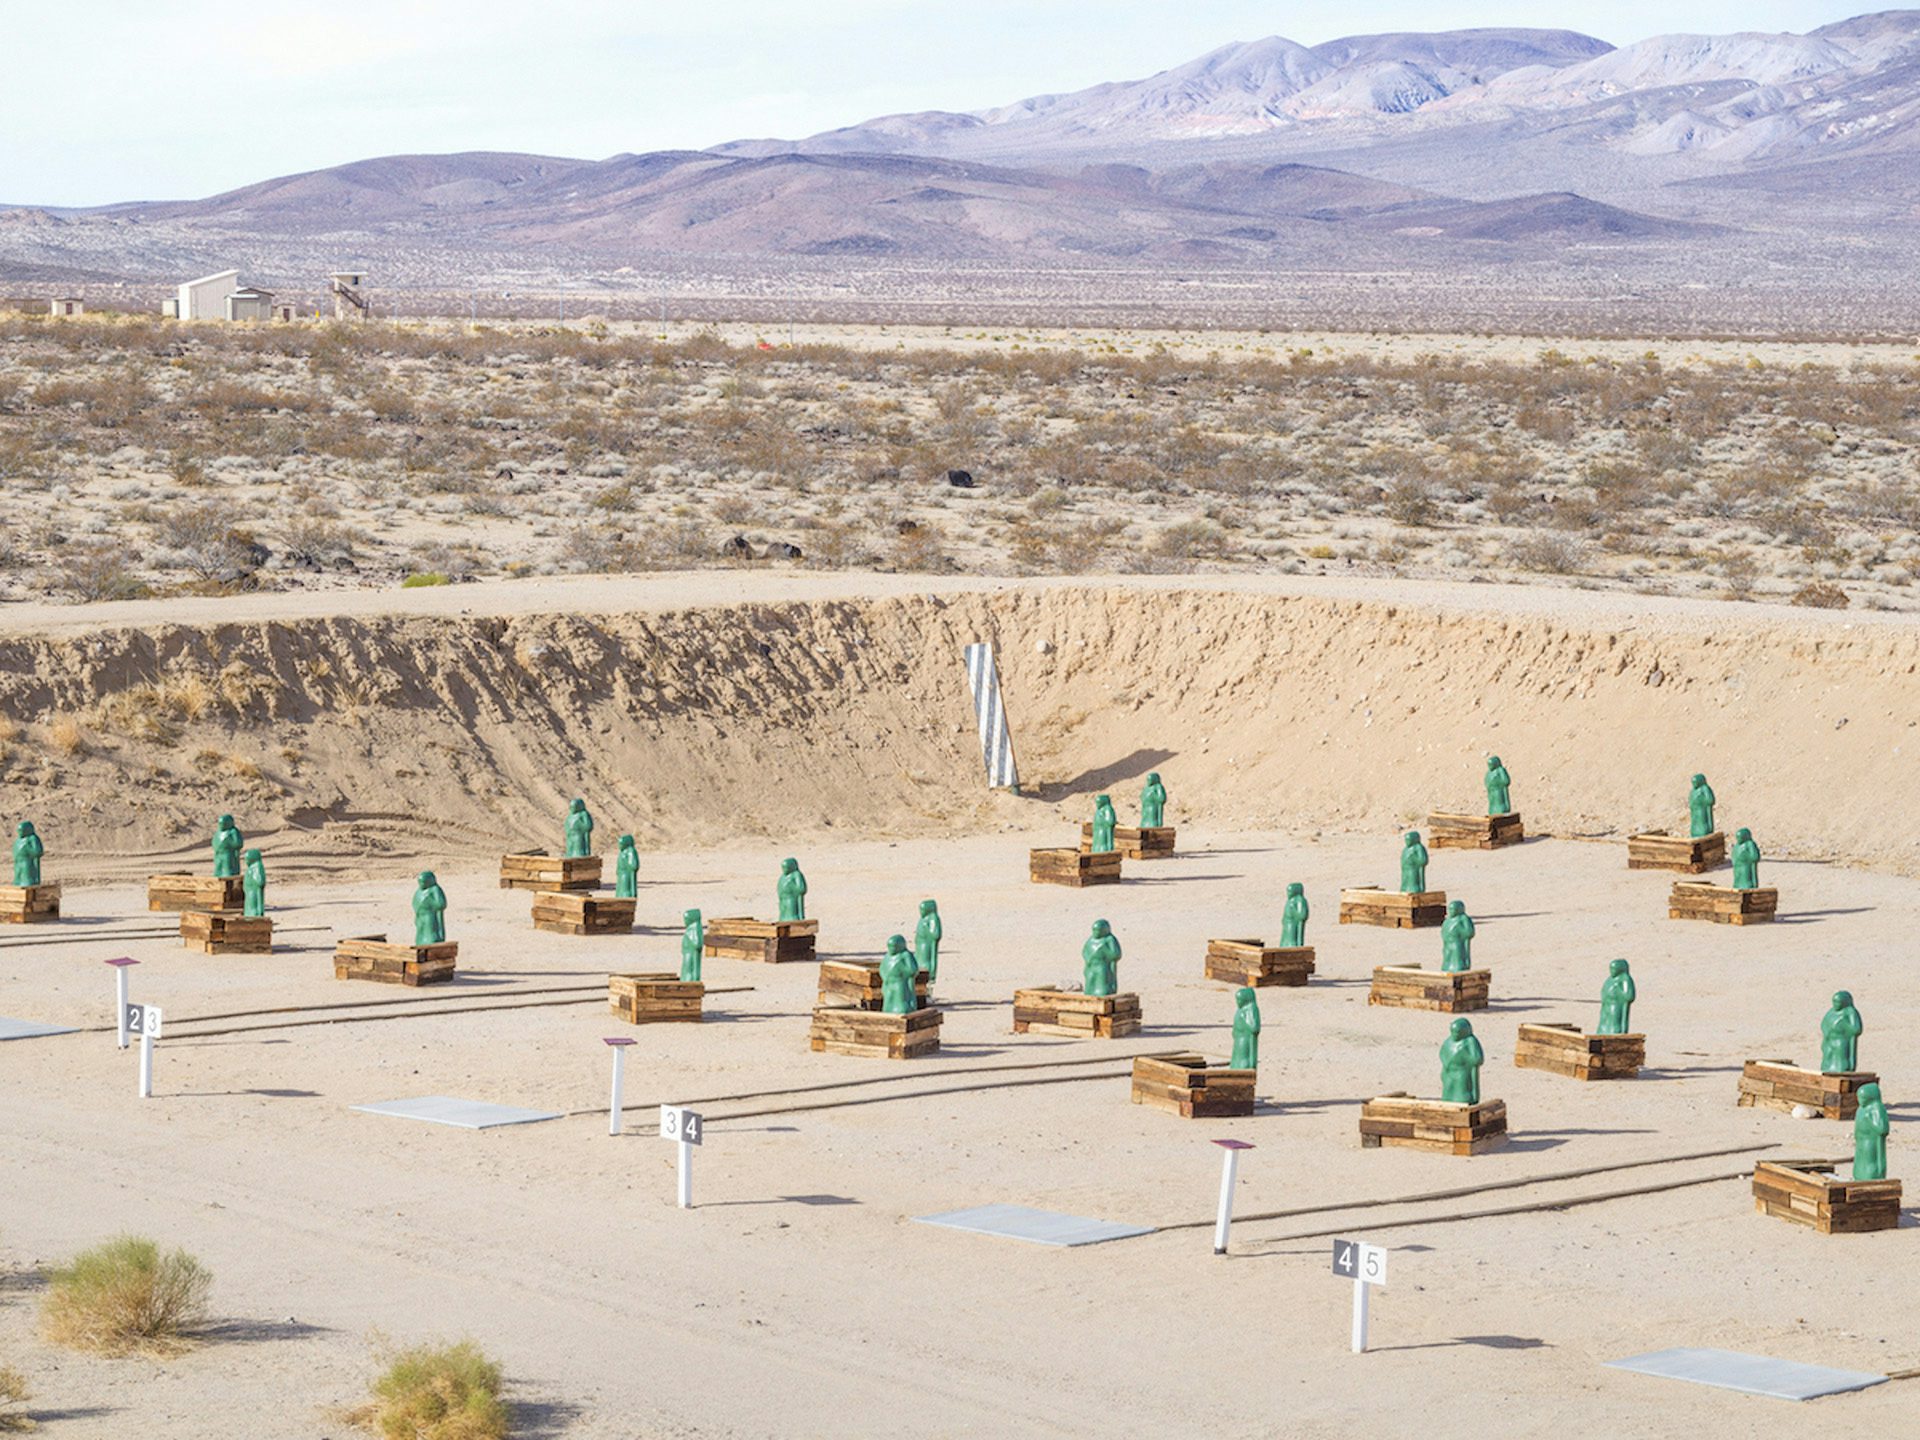 Image from American Glitch by Andrea Orejarena and Caleb Stein showing a series of green figures arranged in a desert firing range